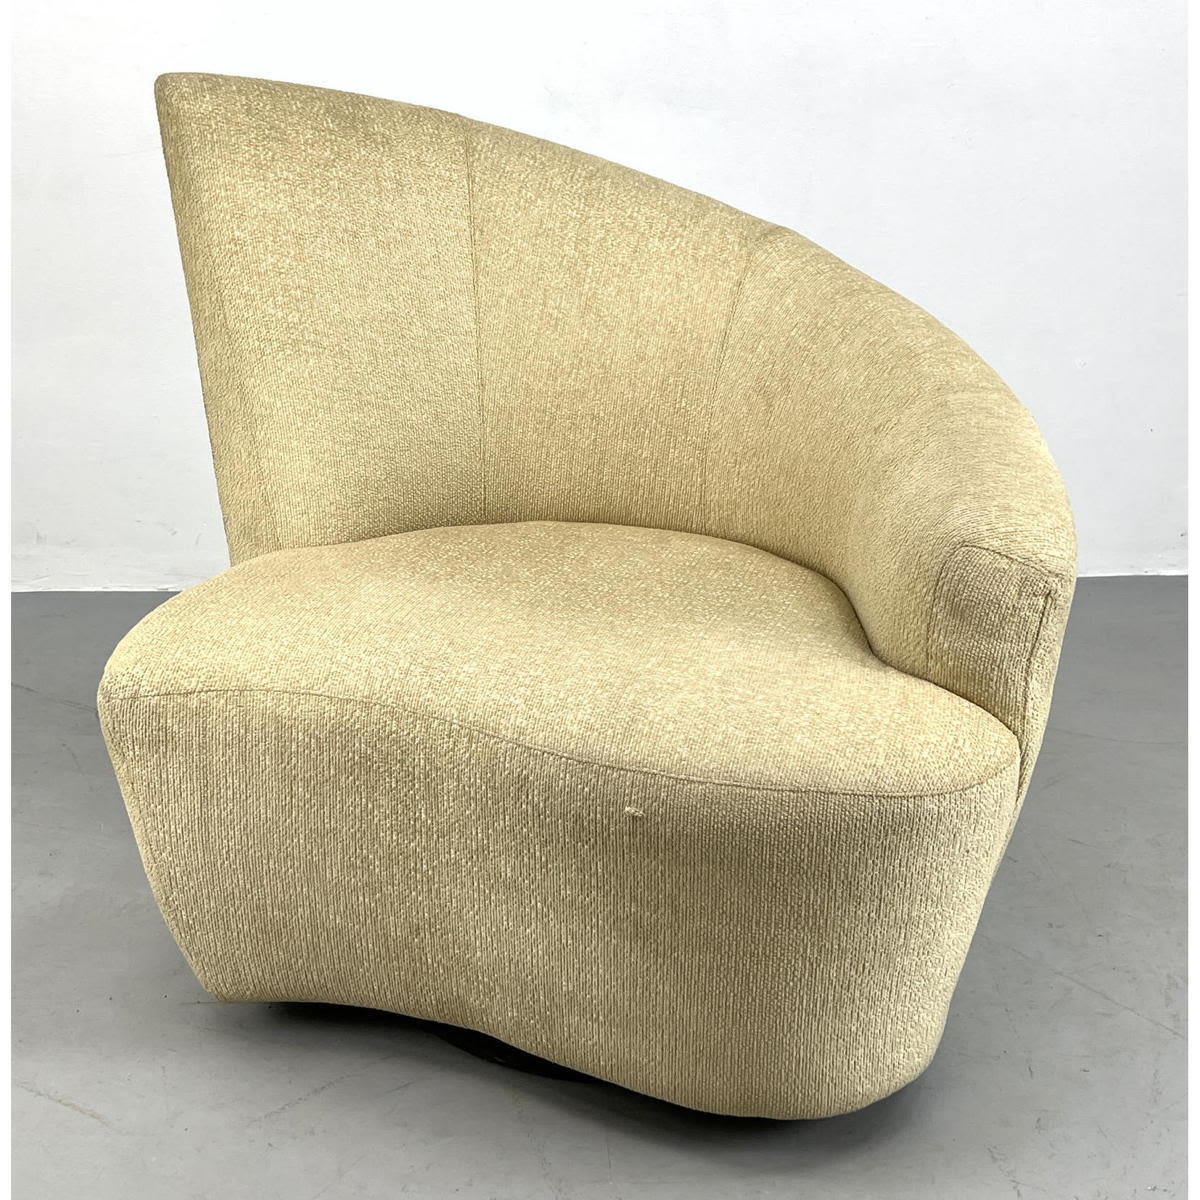 KAGAN Style Swivel Arm Chair with